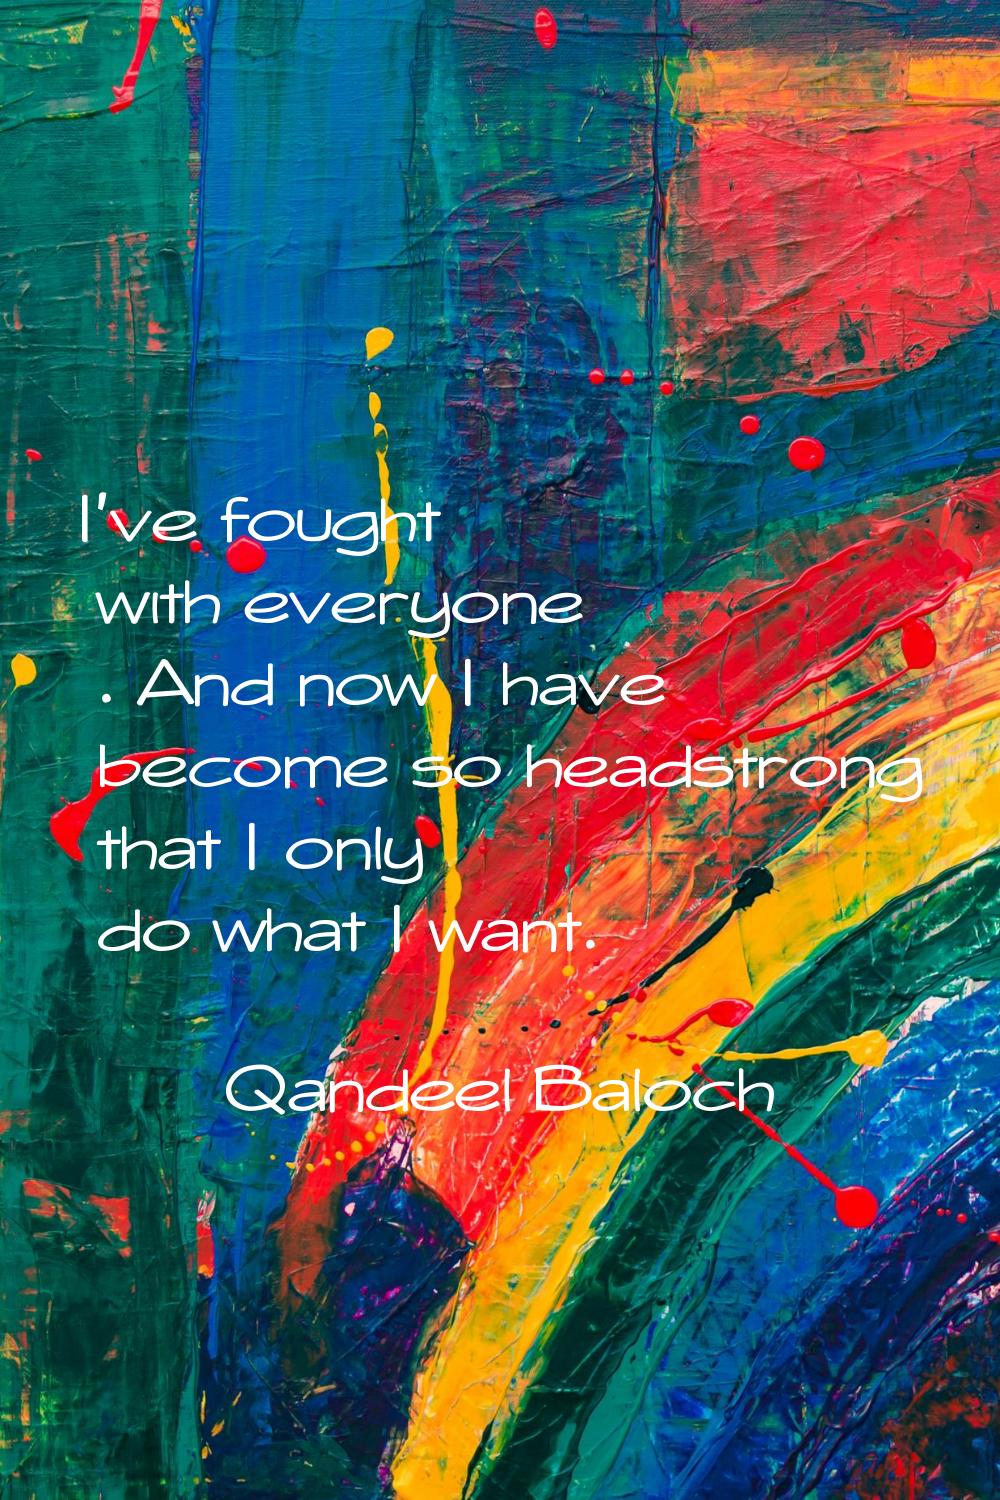 I've fought with everyone . And now I have become so headstrong that I only do what I want.